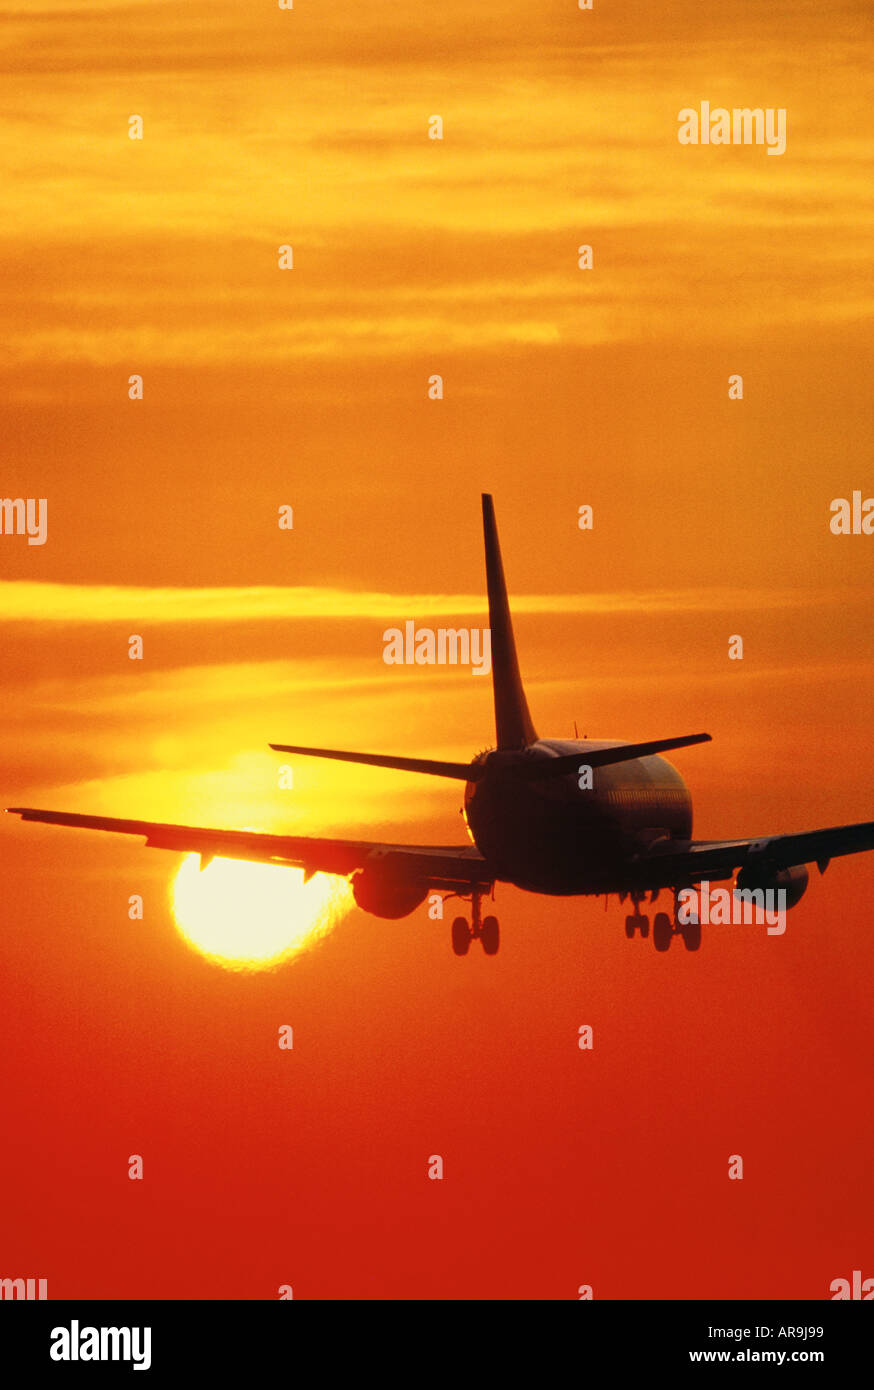 Boeing 737 in the air flying into an golden orange sky at sunset sunrise dusk silhouette Stock Photo